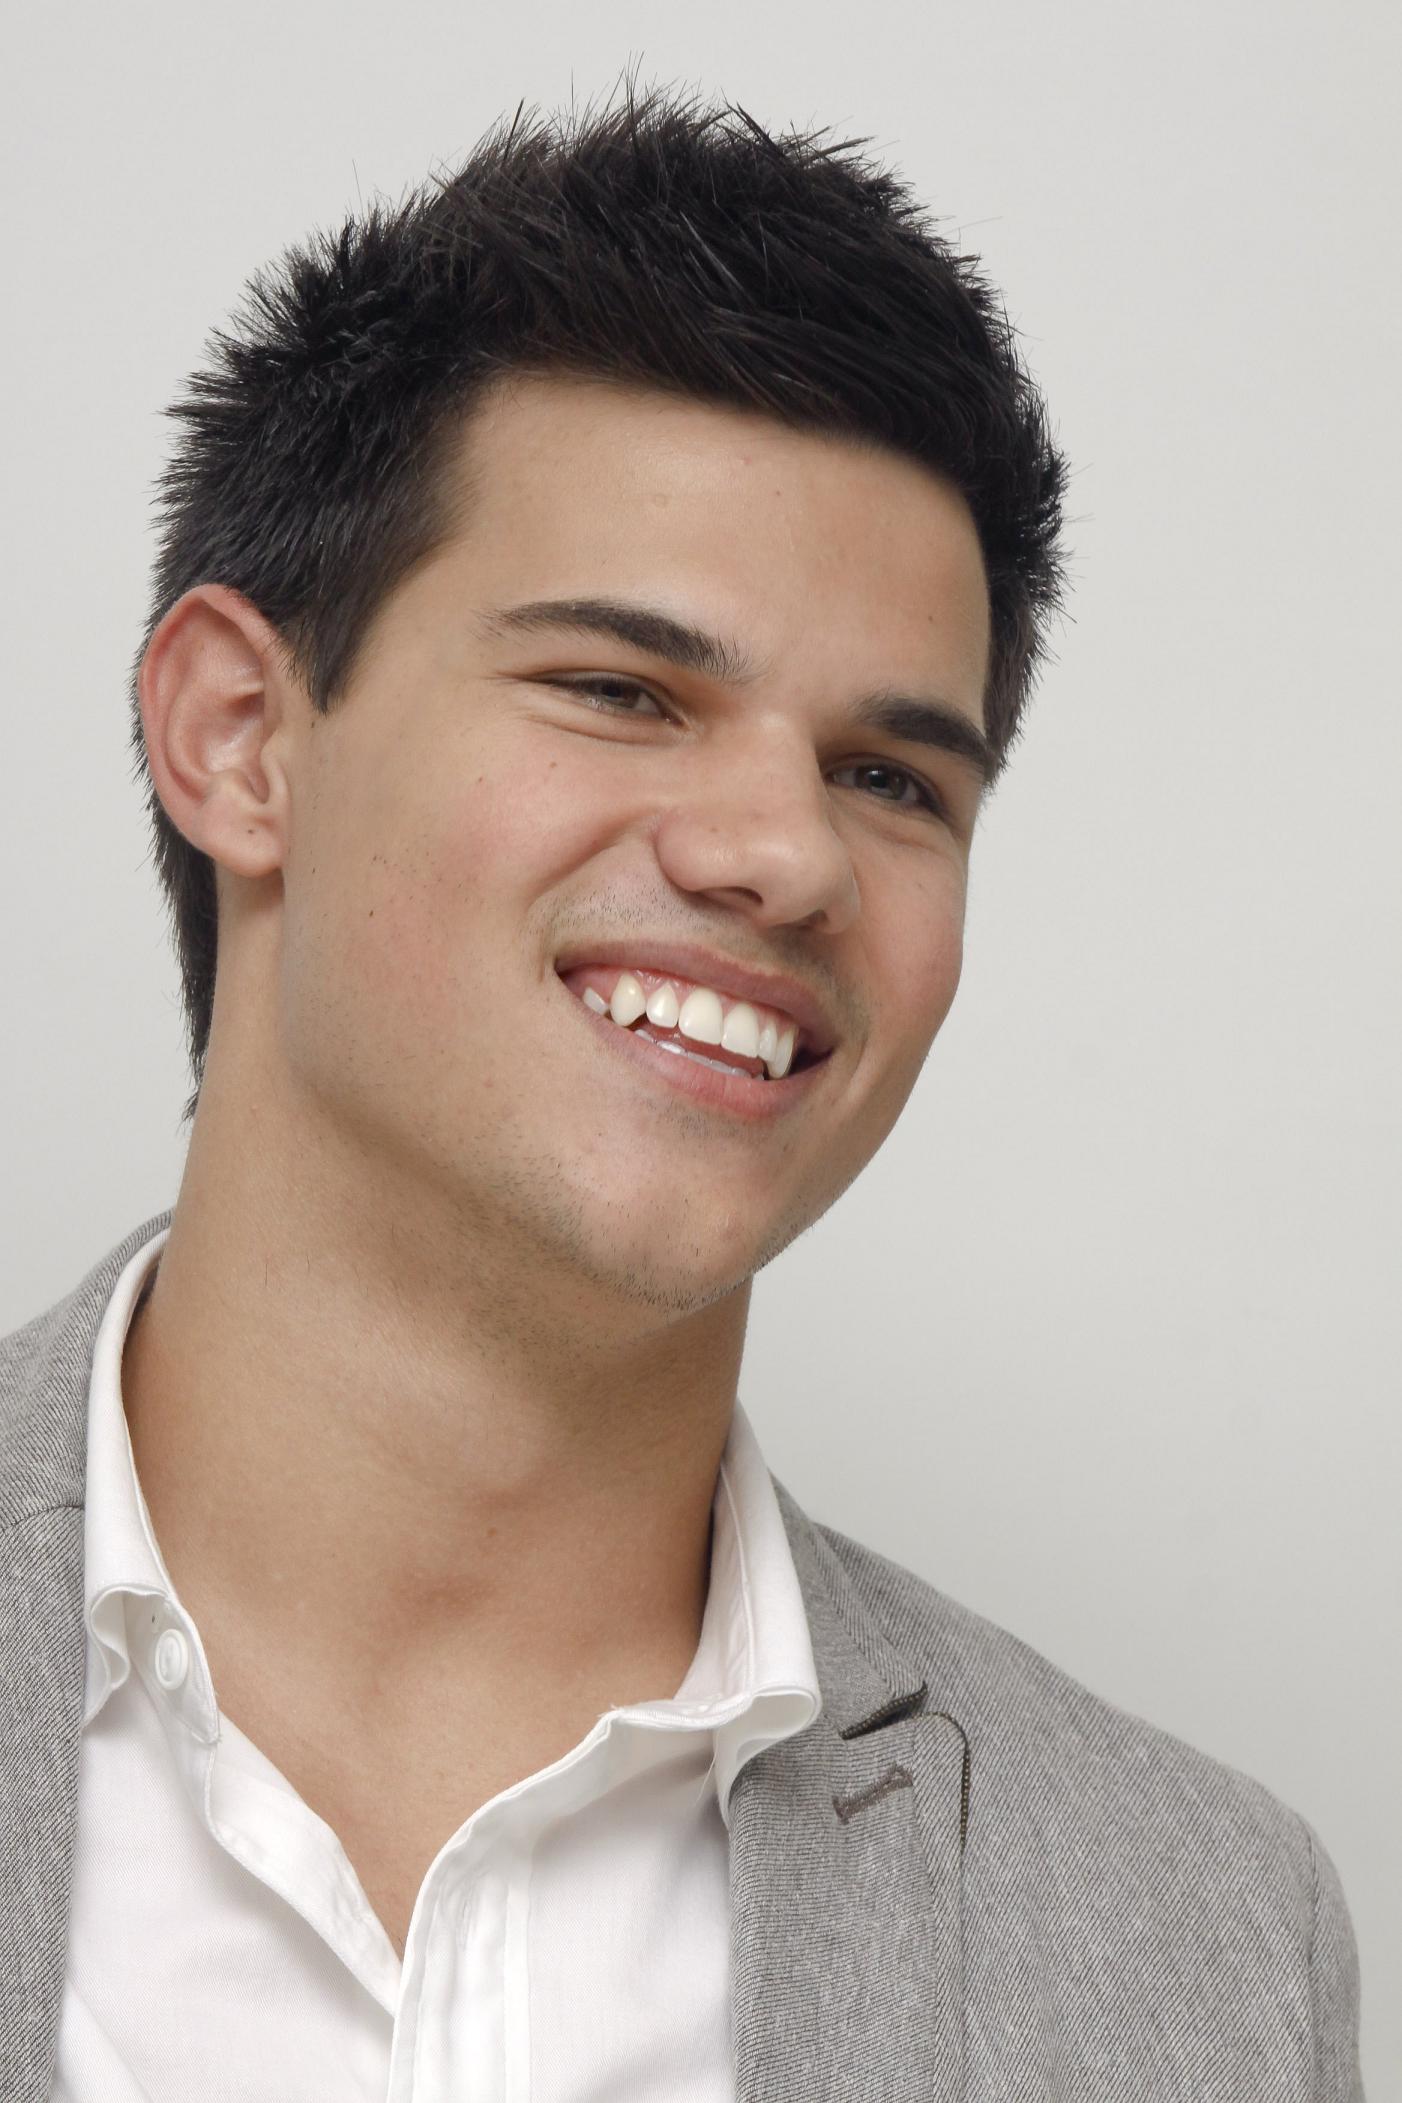 Taylor Lautner photo 56 of 643 pics, wallpaper - photo #234785 - ThePlace2